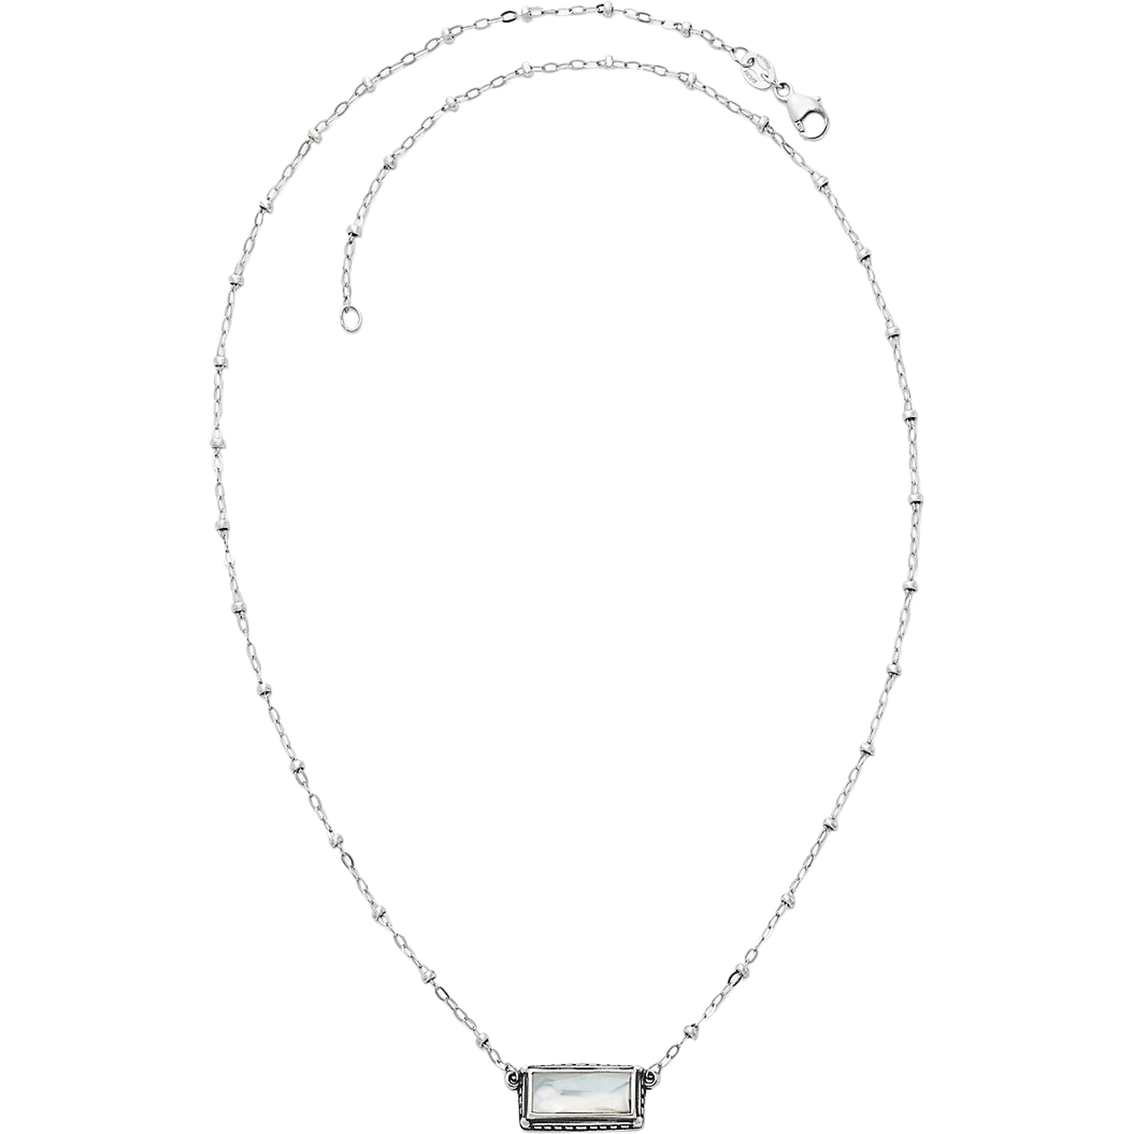 James Avery Palais Blanc Doublet Necklace - Image 2 of 2